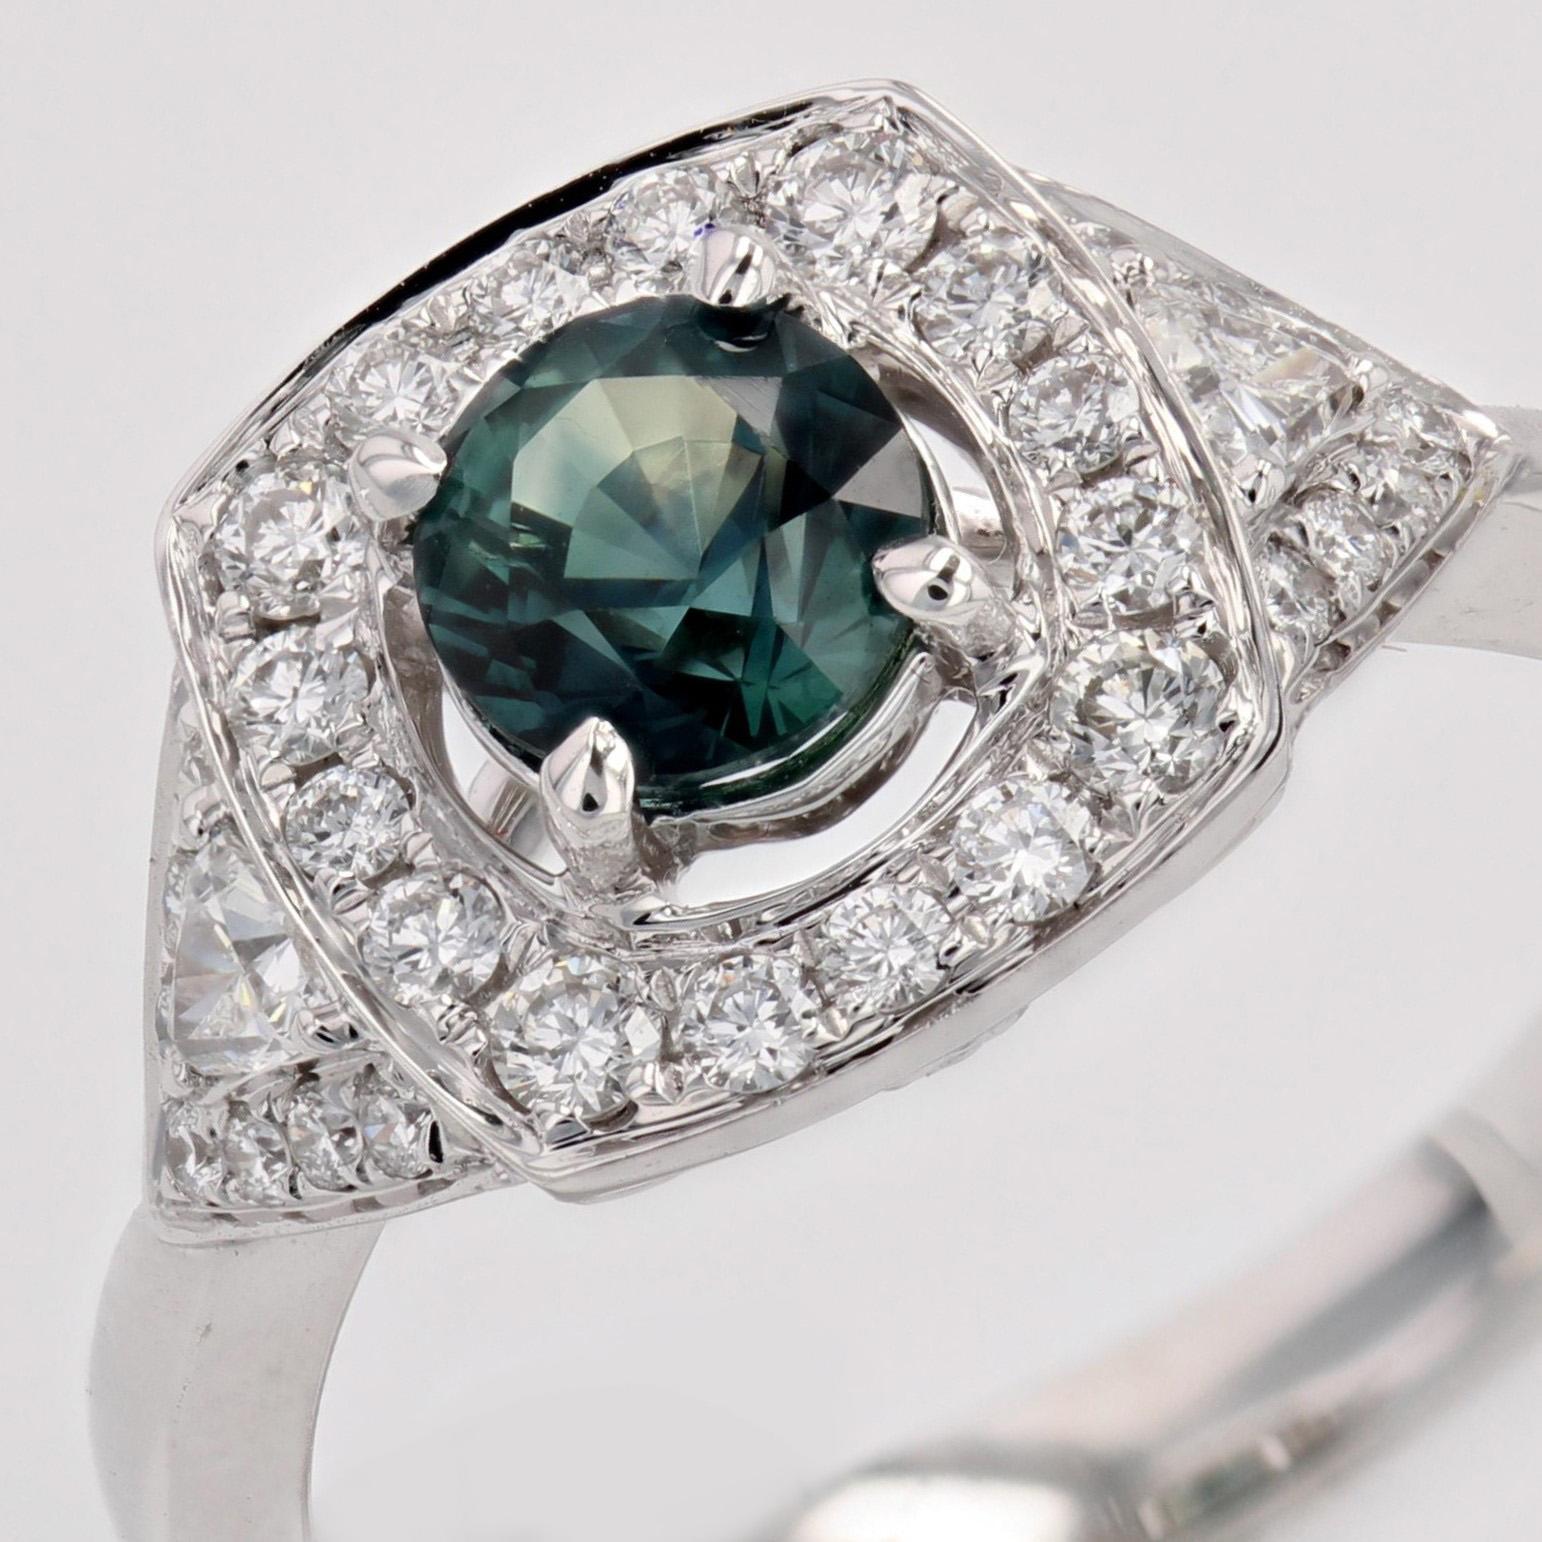 New Art Deco Style Teal Sapphire Diamonds 18 Karat White Gold Cluster Ring For Sale 4